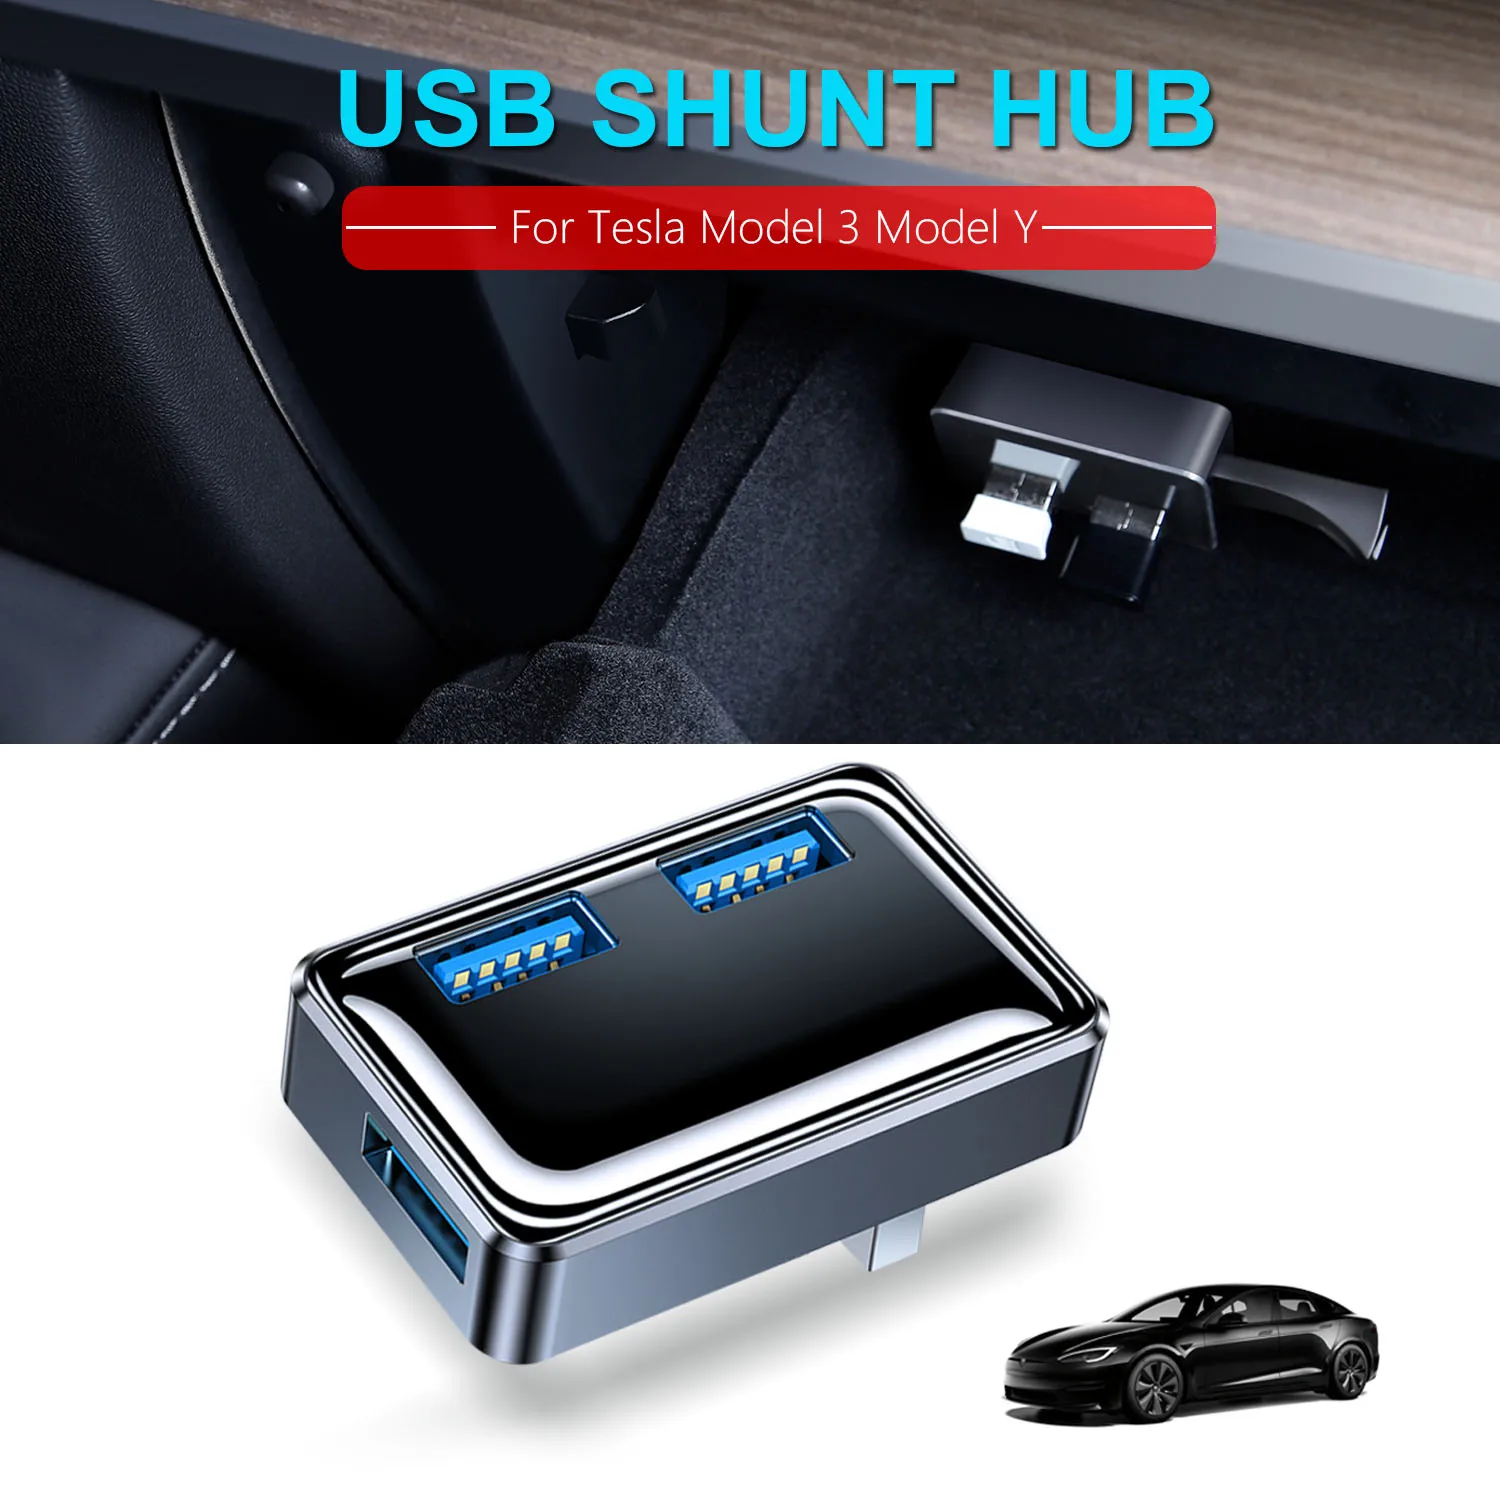 For Tesla Model Y Model 3 Accessories Glovebox USB Hub Port 모델3 모델y Docking  Station Quick Charger Adapter Splitter Extension - AliExpress